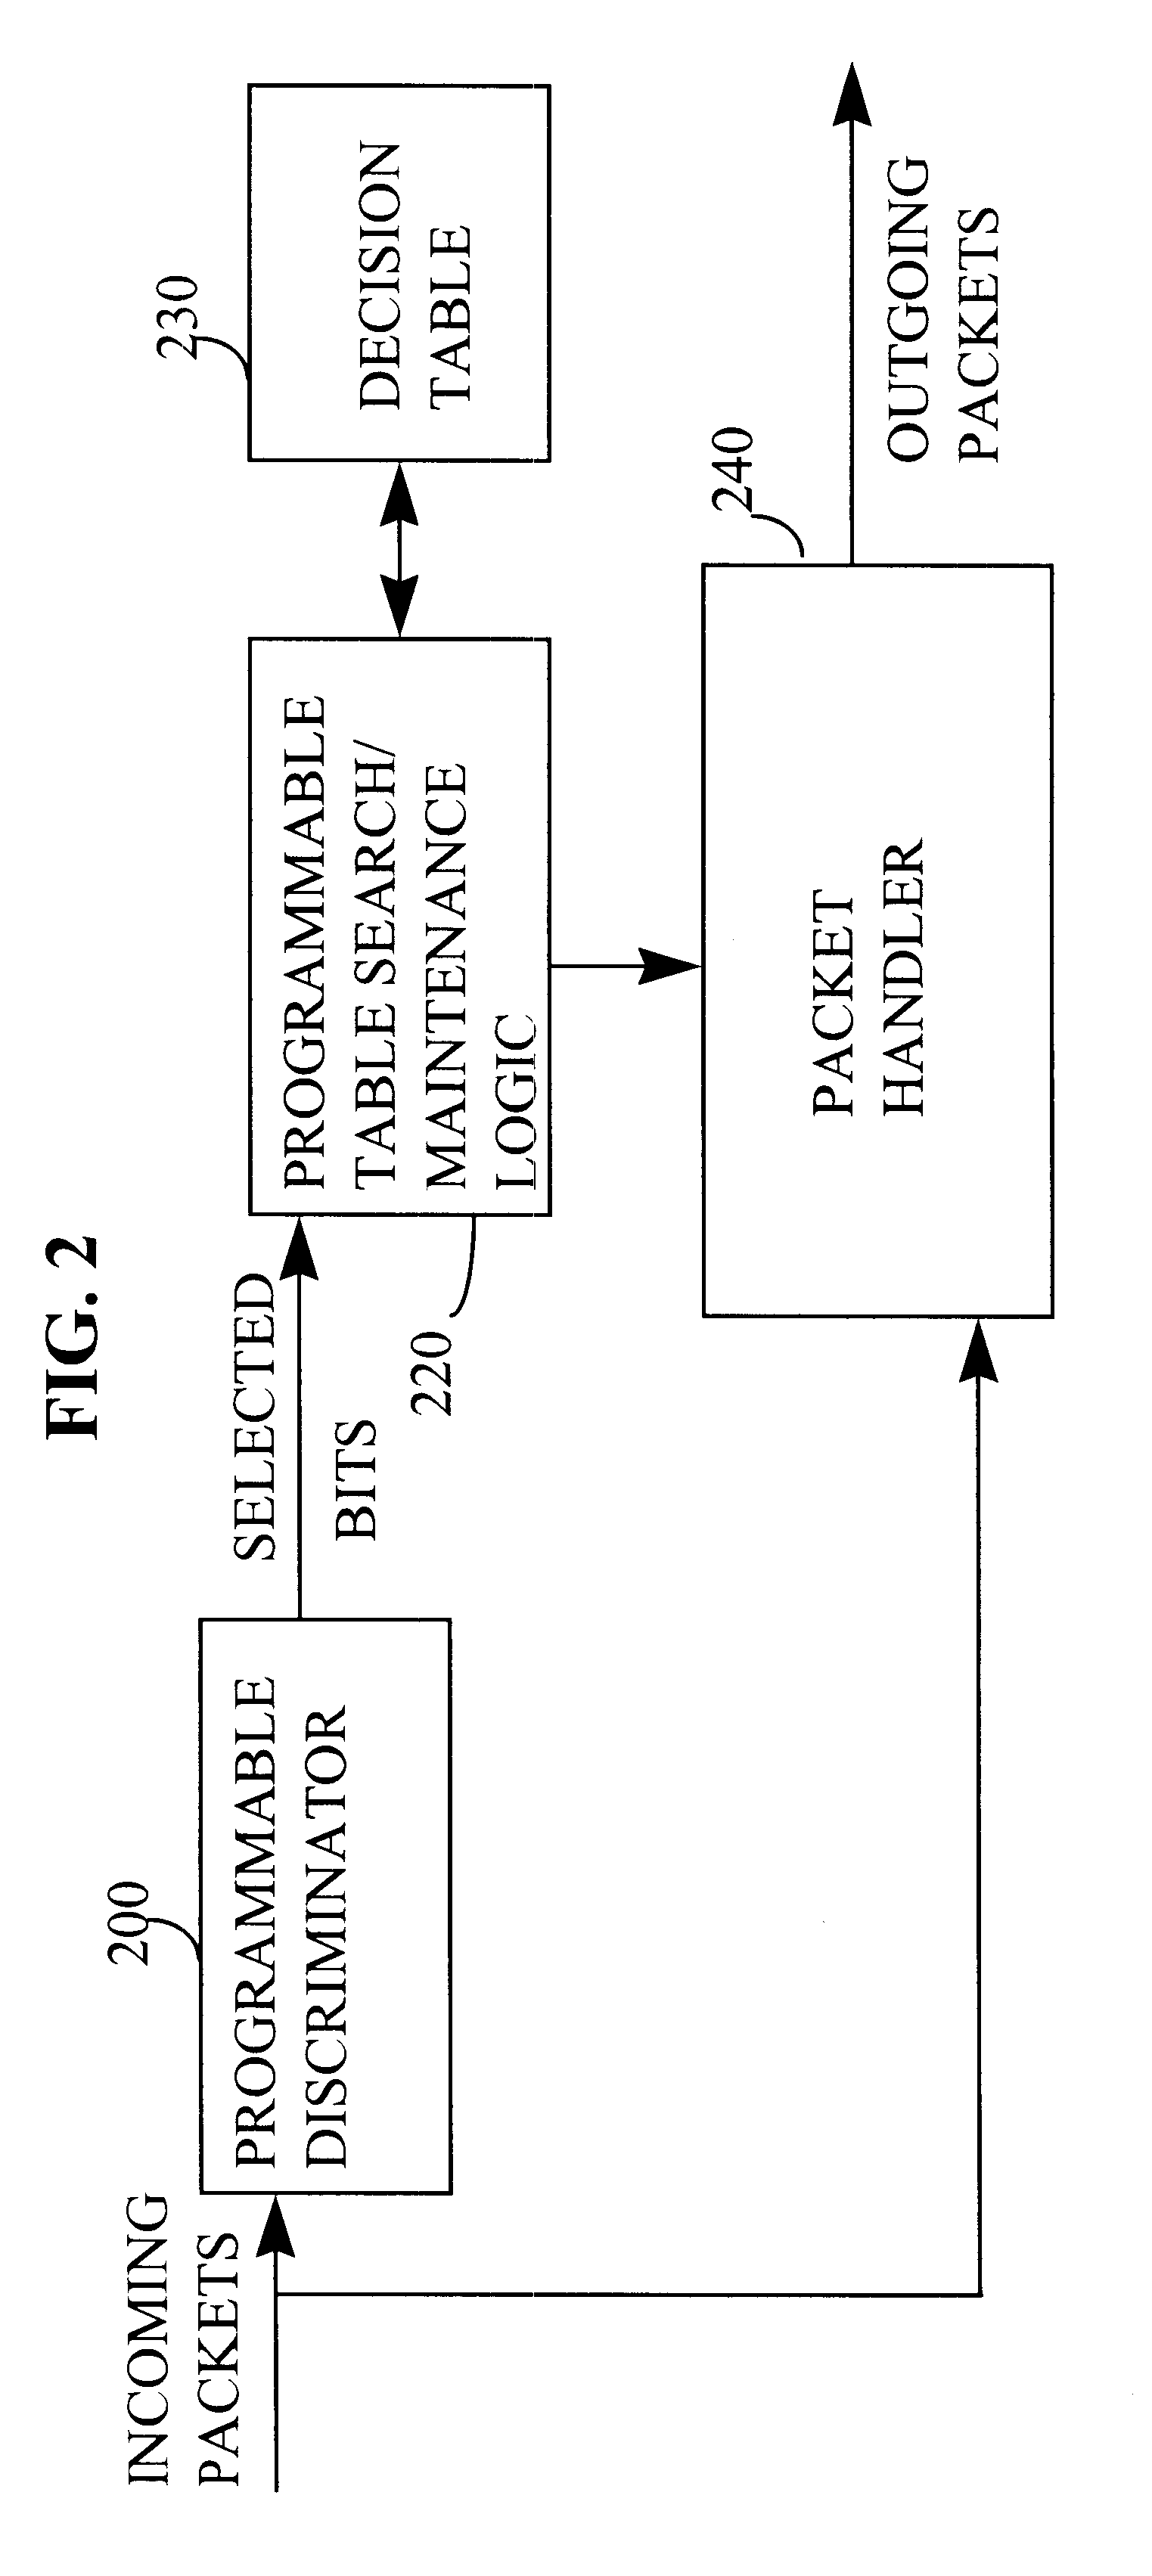 Programmable packet switching device